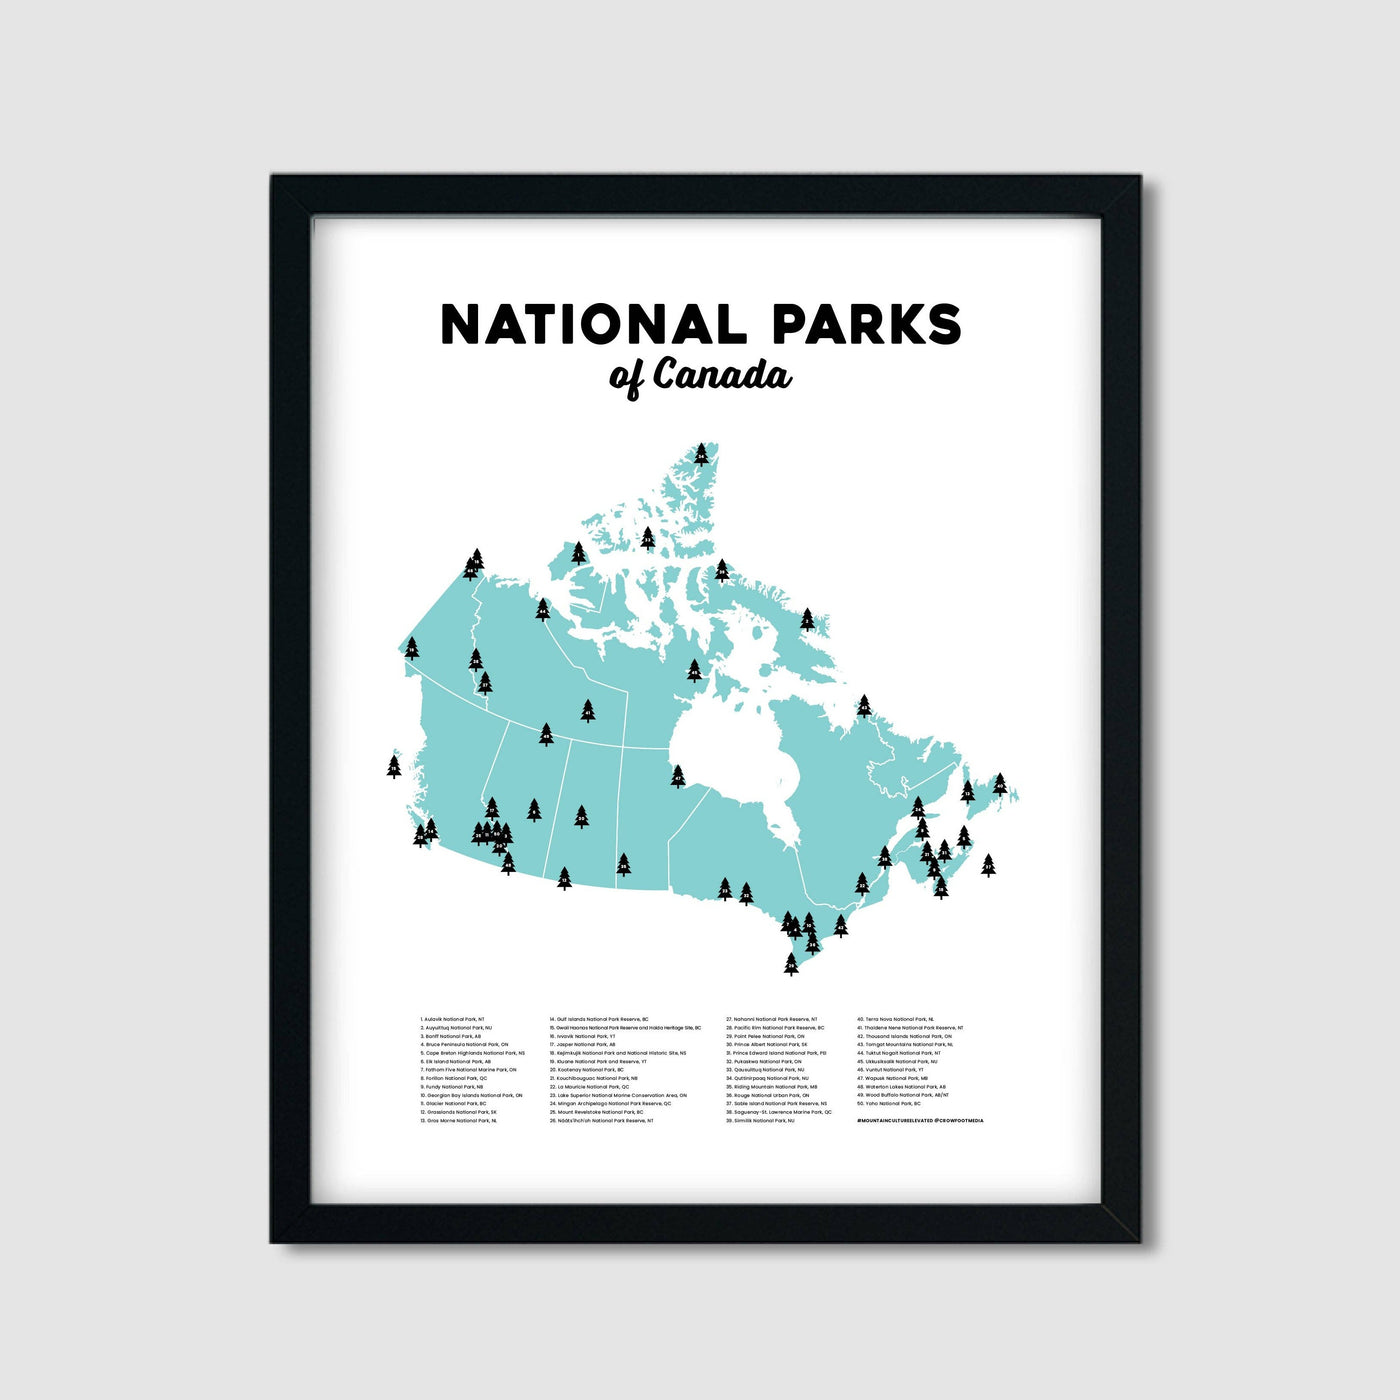 Wildly Supply Co. | National Parks of Canada Print, The Local Space, Local Canadian Brands